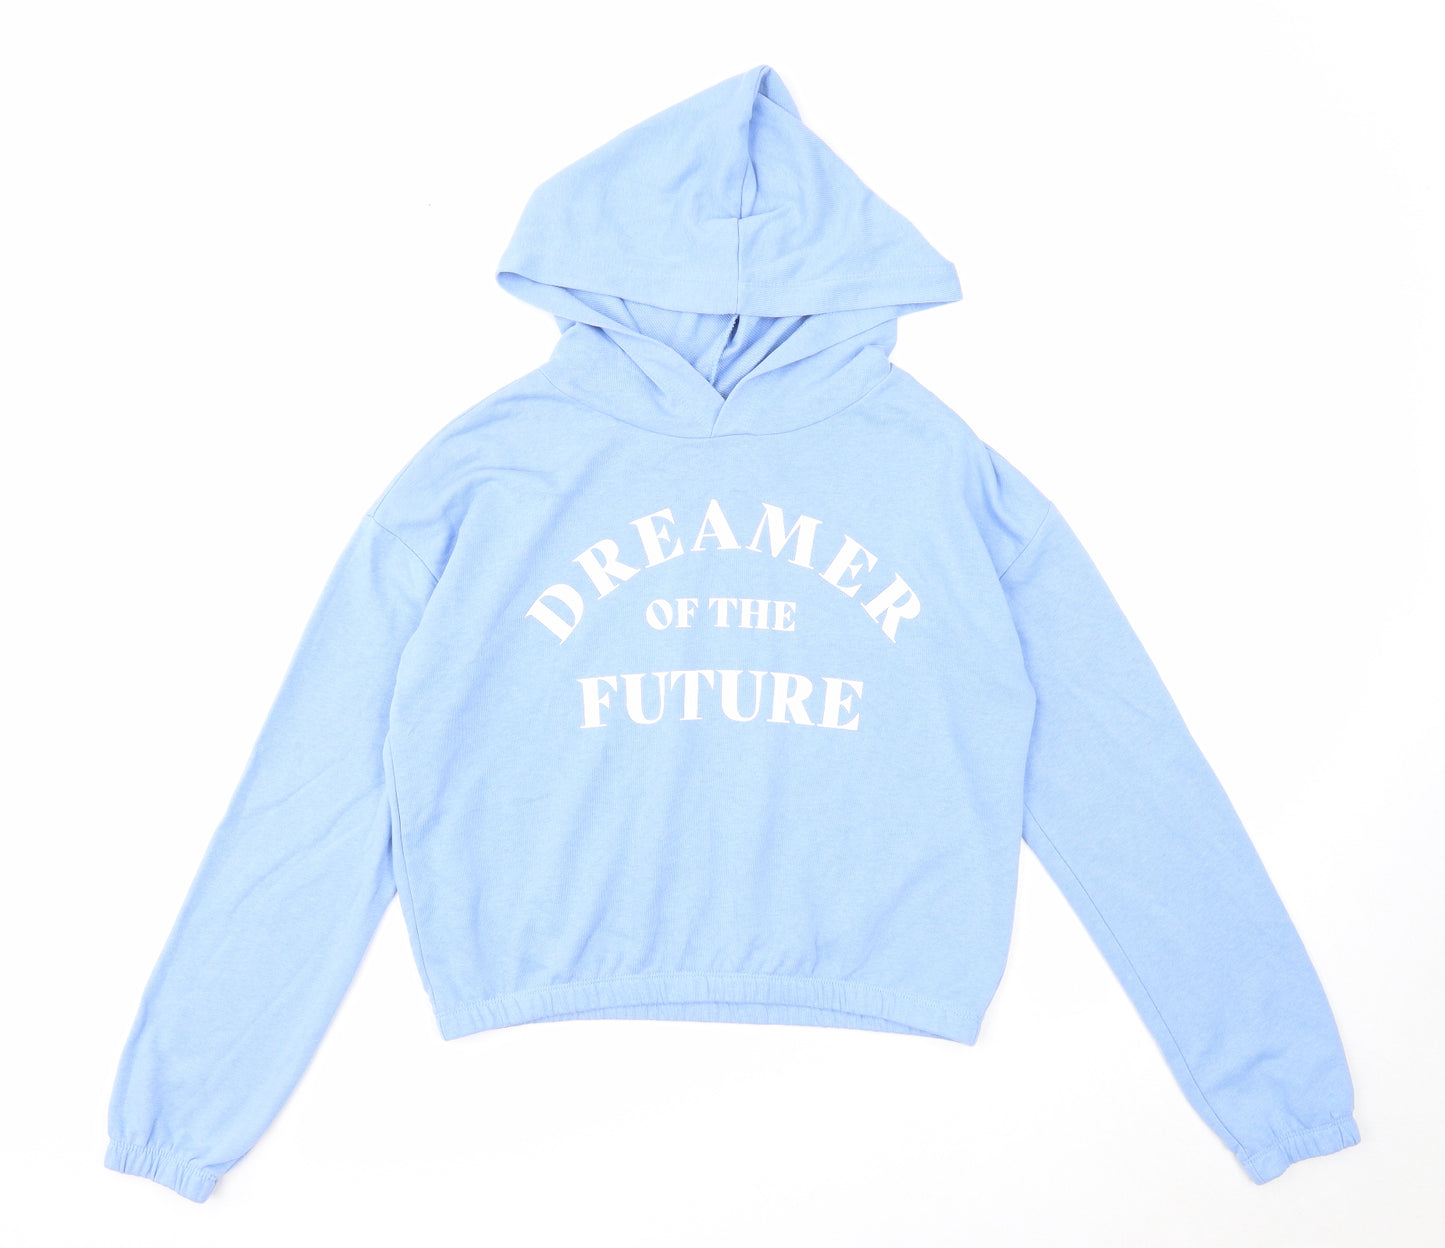 H&M Girls Blue Cotton Pullover Hoodie Size 12-13 Years Pullover - Dreamer of the Future